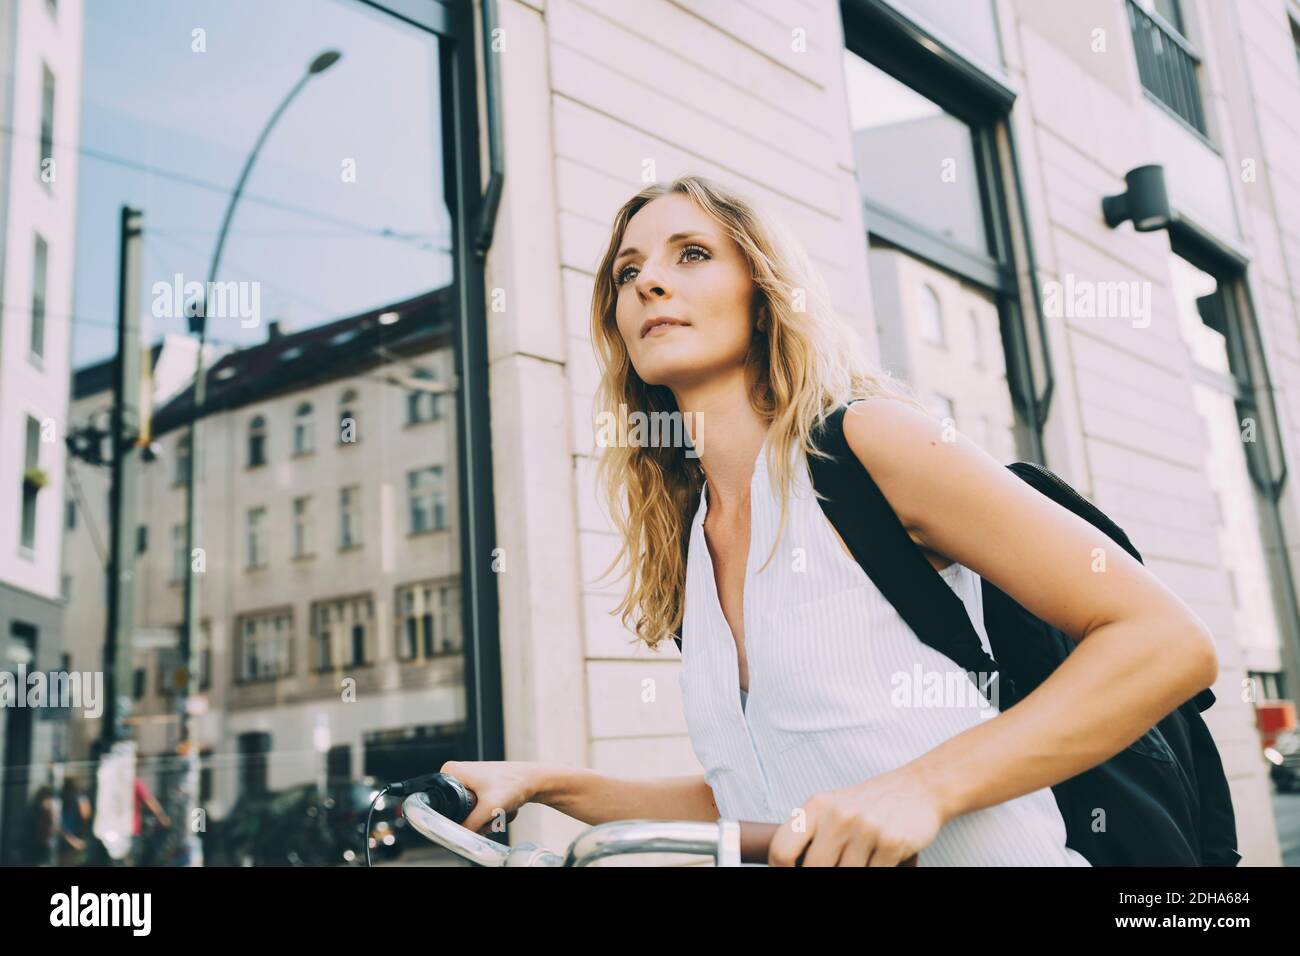 Female entrepreneur with bicycle standing against building in city Stock Photo